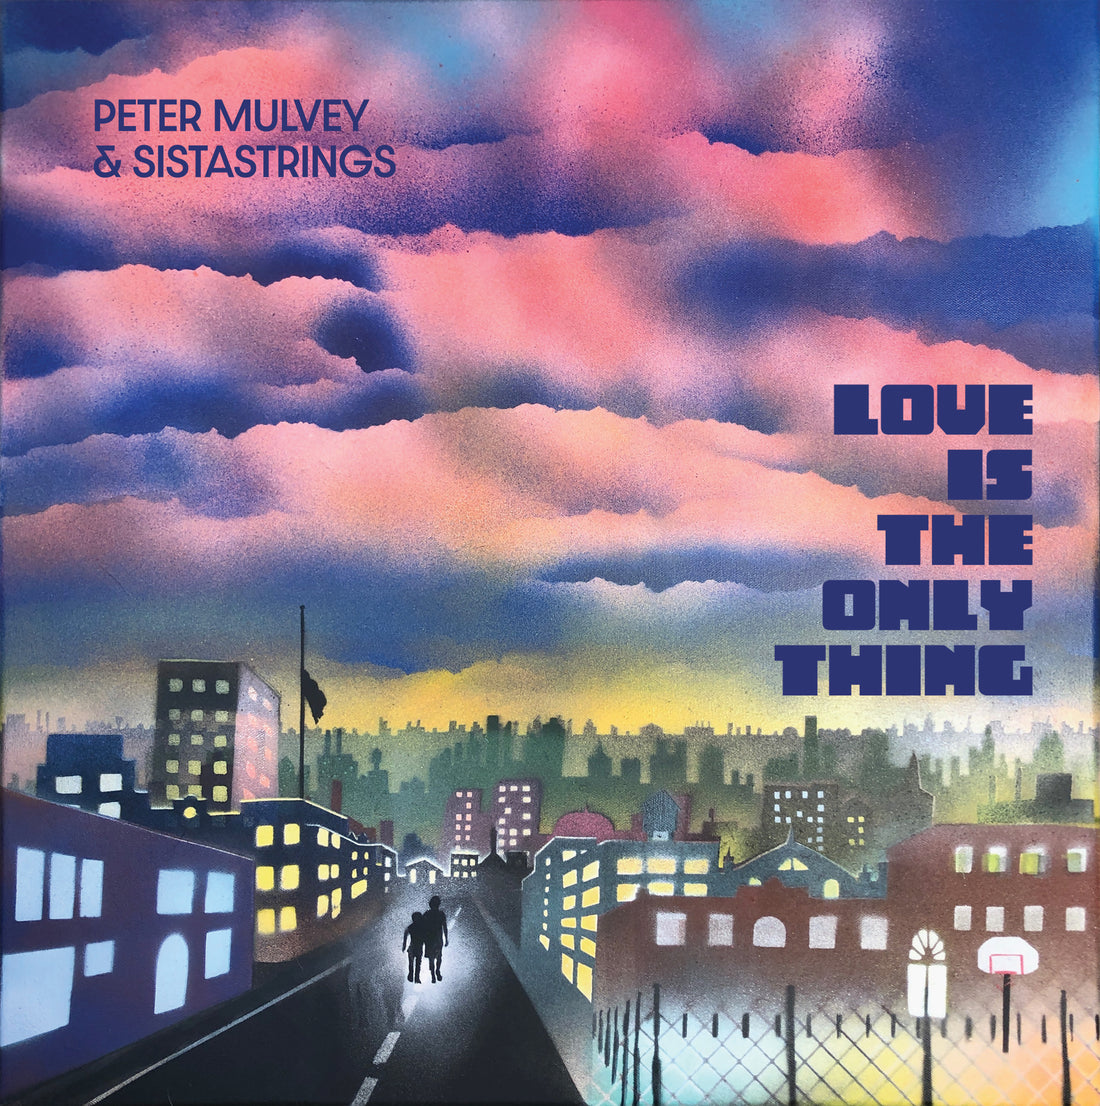 Announcing Peter Mulvey & SistaStrings album Love Is The Only Thing coming August 12